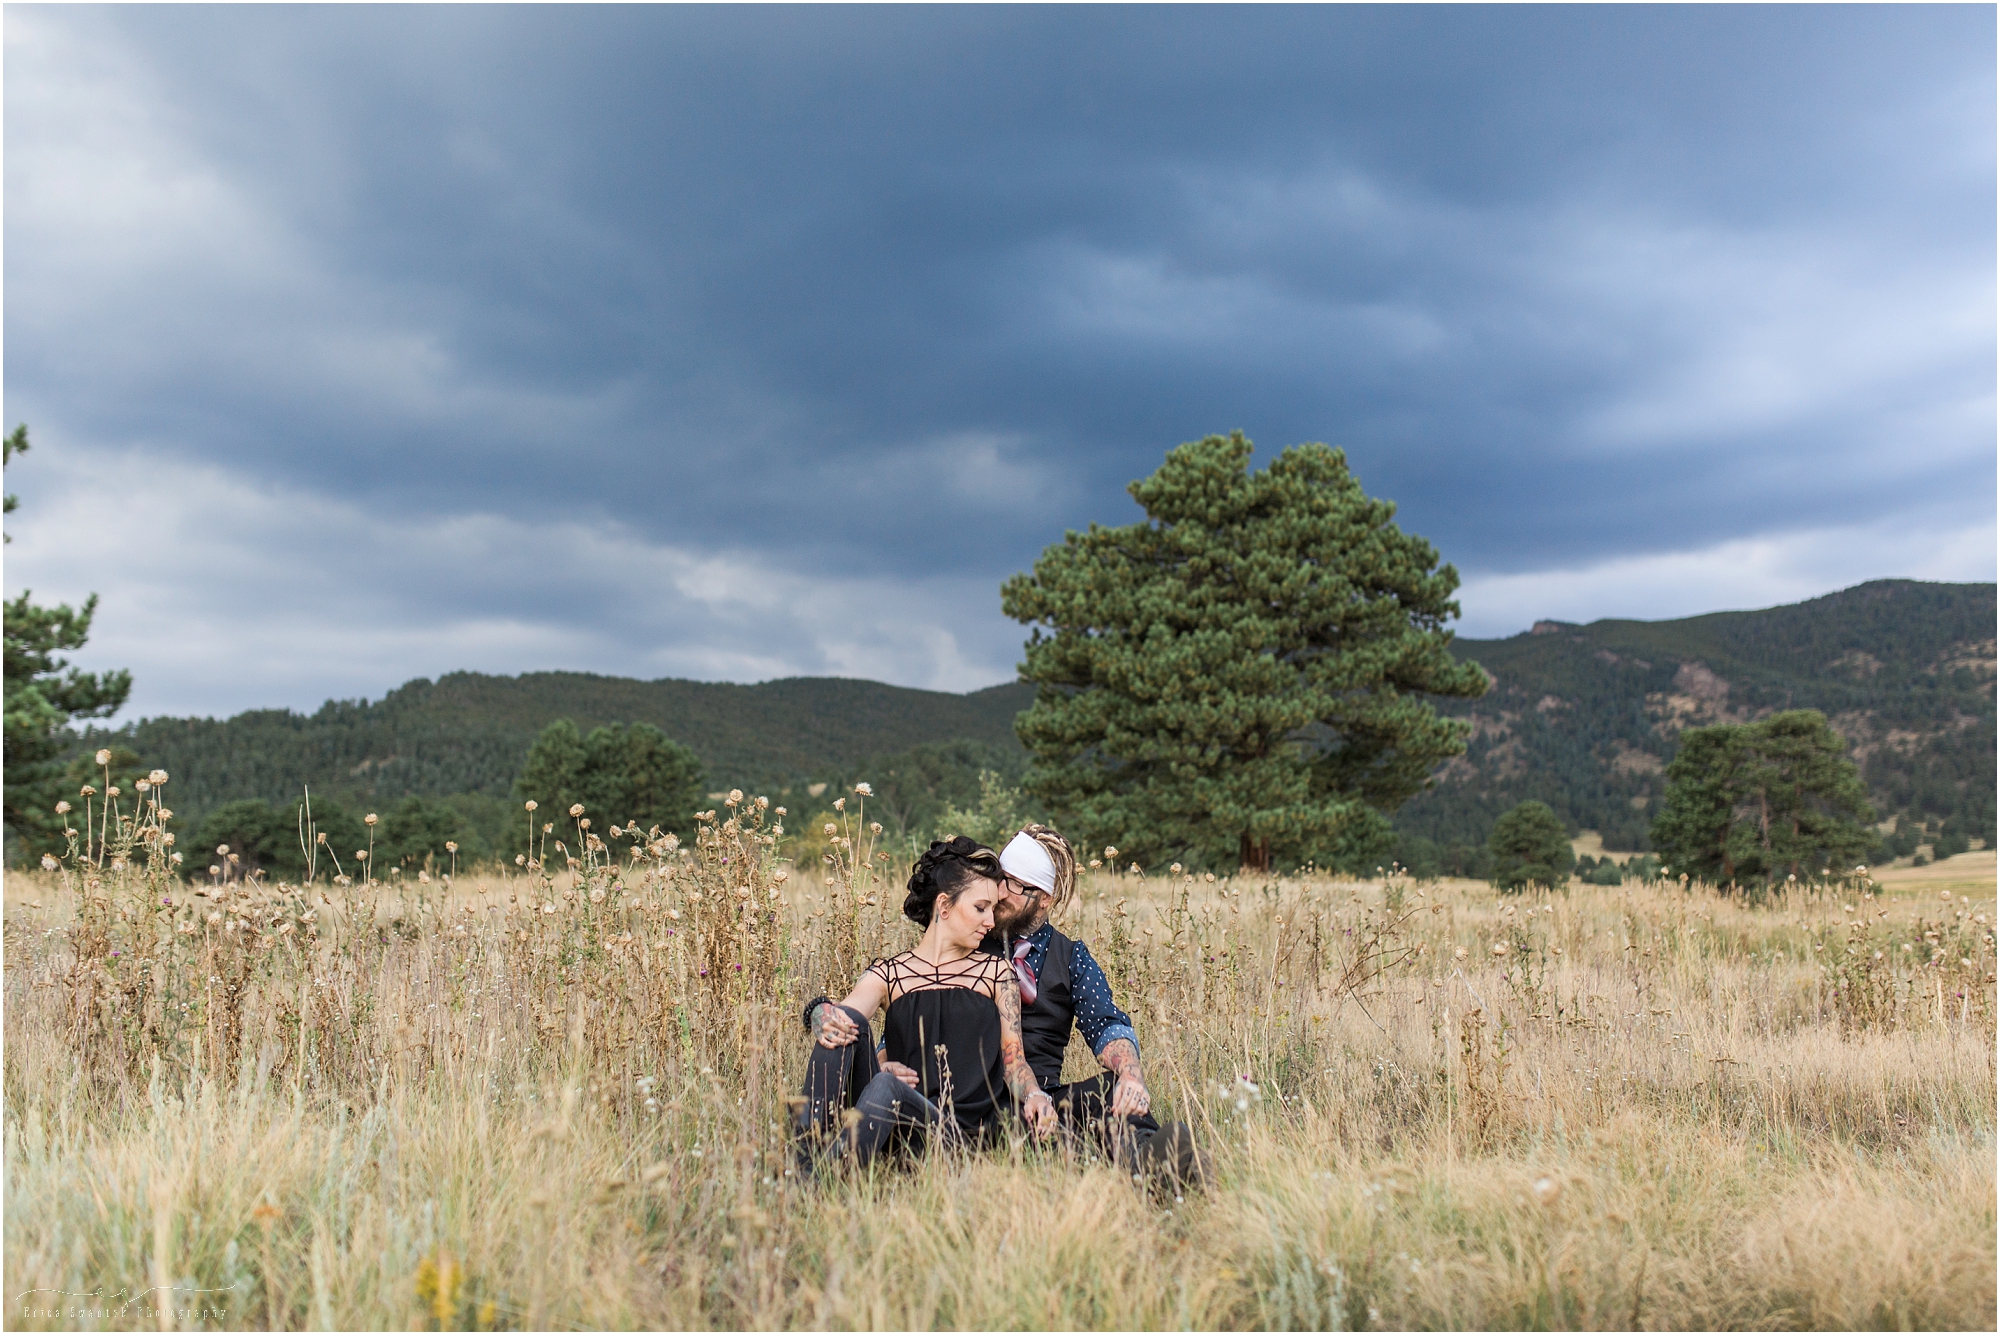 Awesome Colorado stormy skies during this indie couple's engagement photo shoot in Evergreen, CO. 